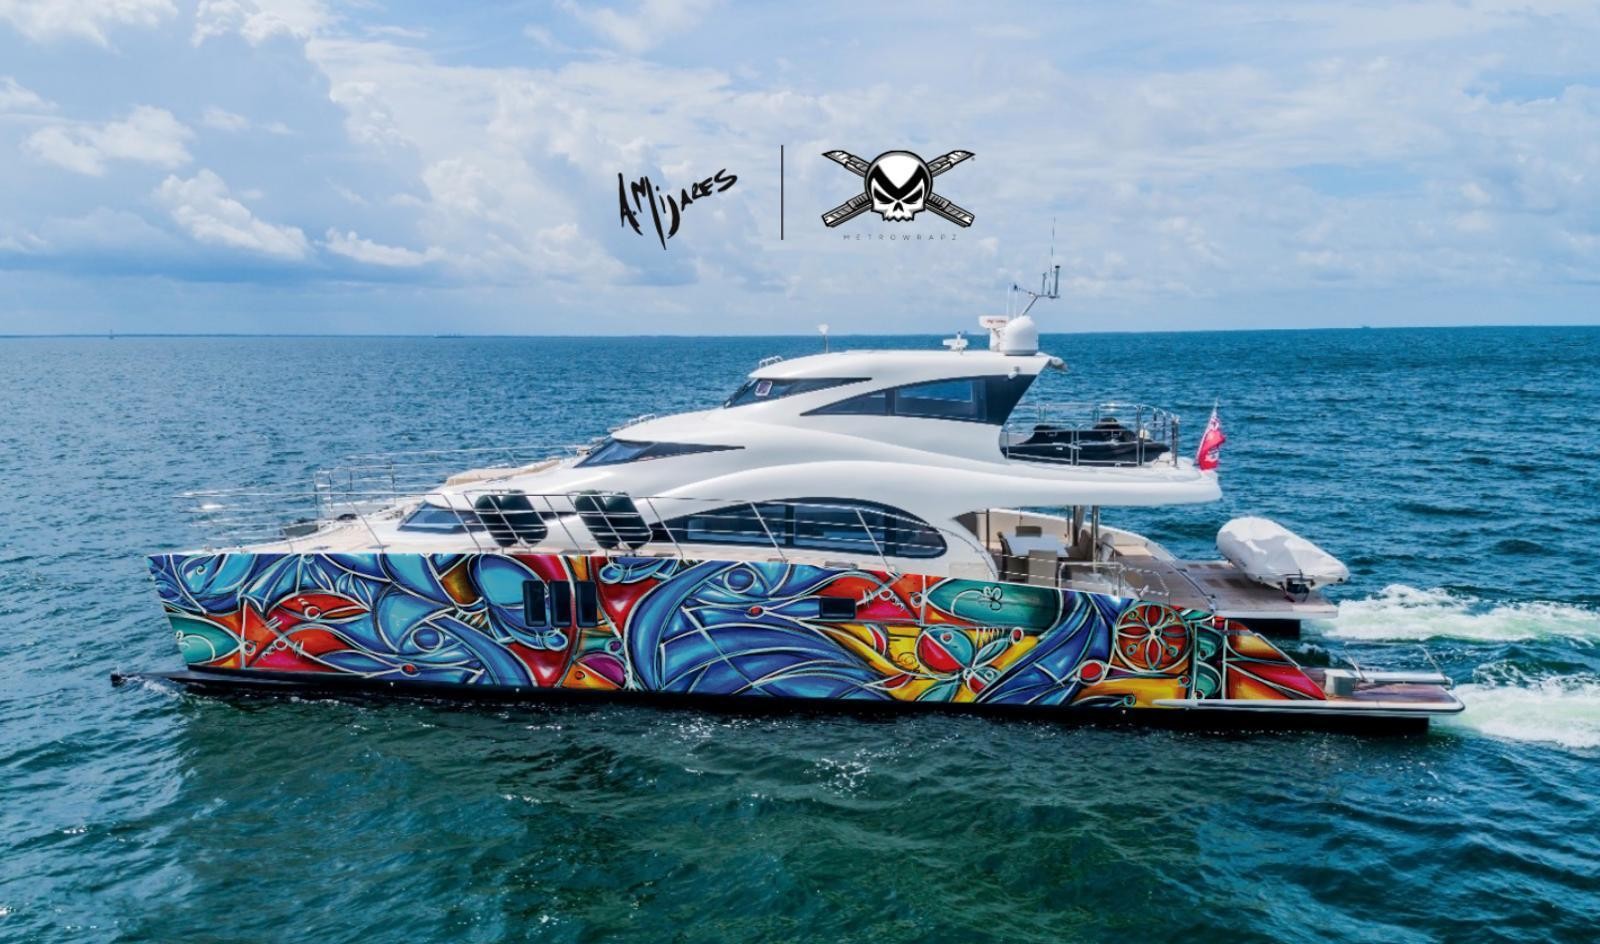 Sunreef Yachts Partners With Artist Alexander Mijares For Art Basel 2019